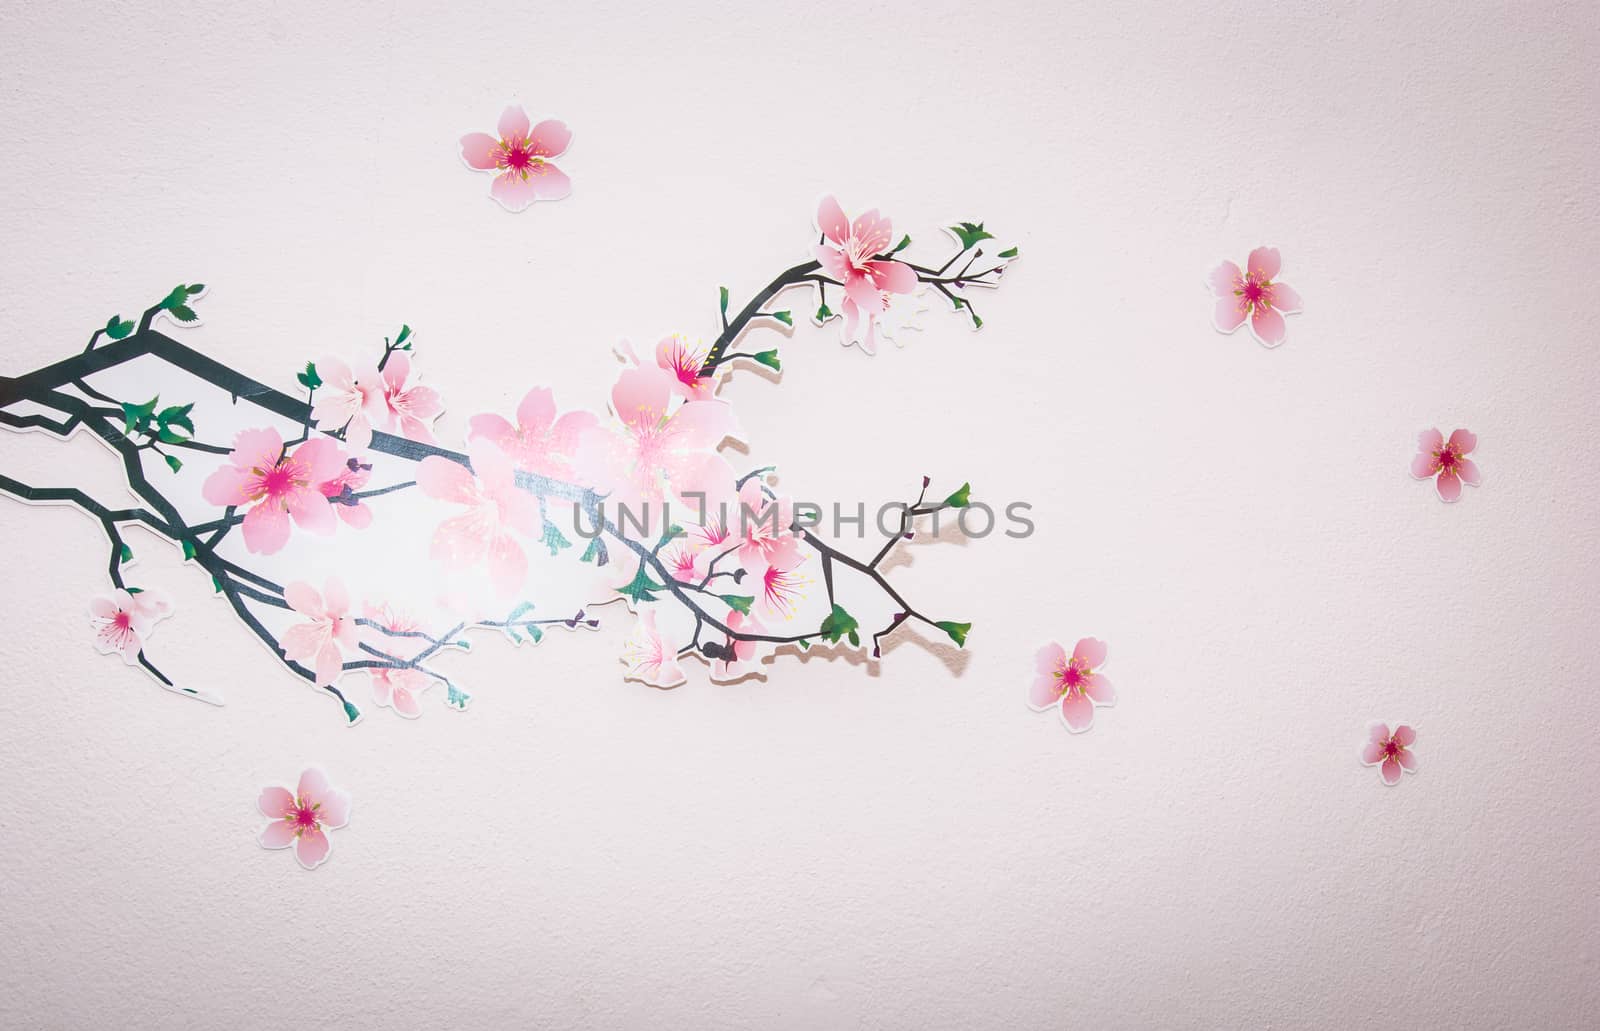 the beautiful flower design on the wall ideal for background and wallpaper purposes